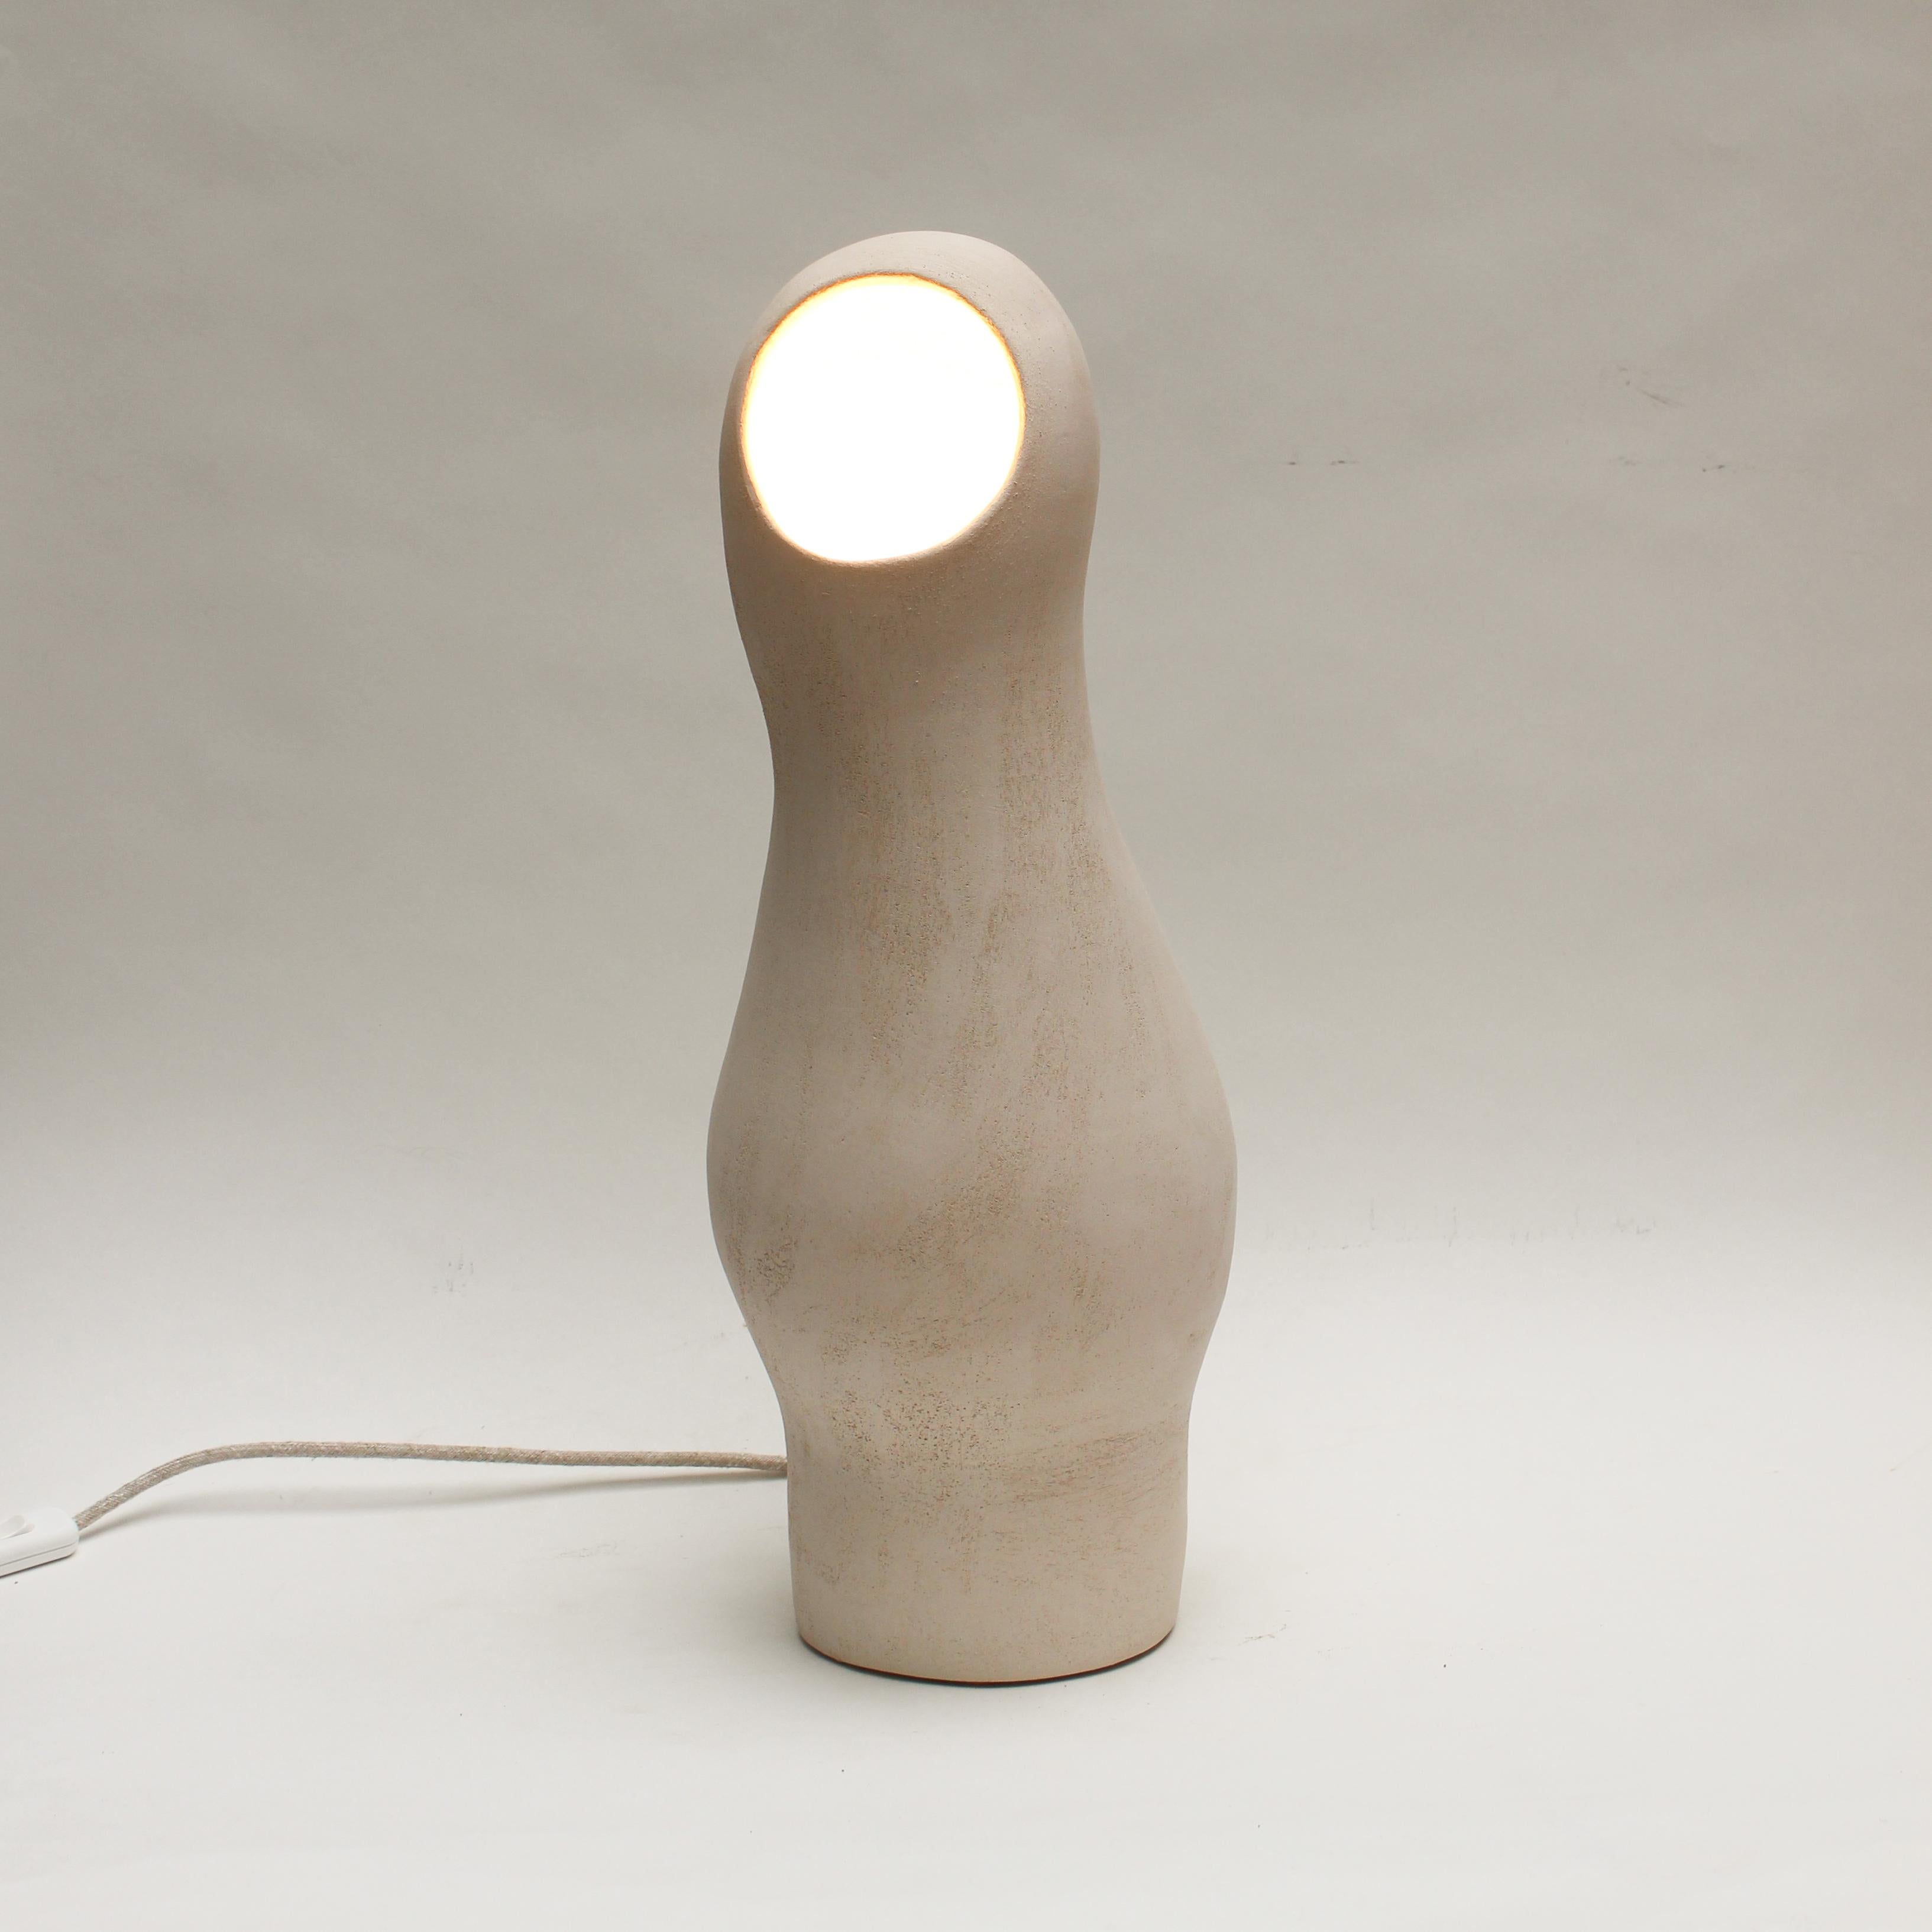 Cocon #4 white stoneware lamp by Elisa Uberti
Dimensions: high around 50cm
Materials: white stoneware

After fifteen years in fashion, Elisa Uberti decides to take the time to work with these hands and to give birth to new projects.

Designer and